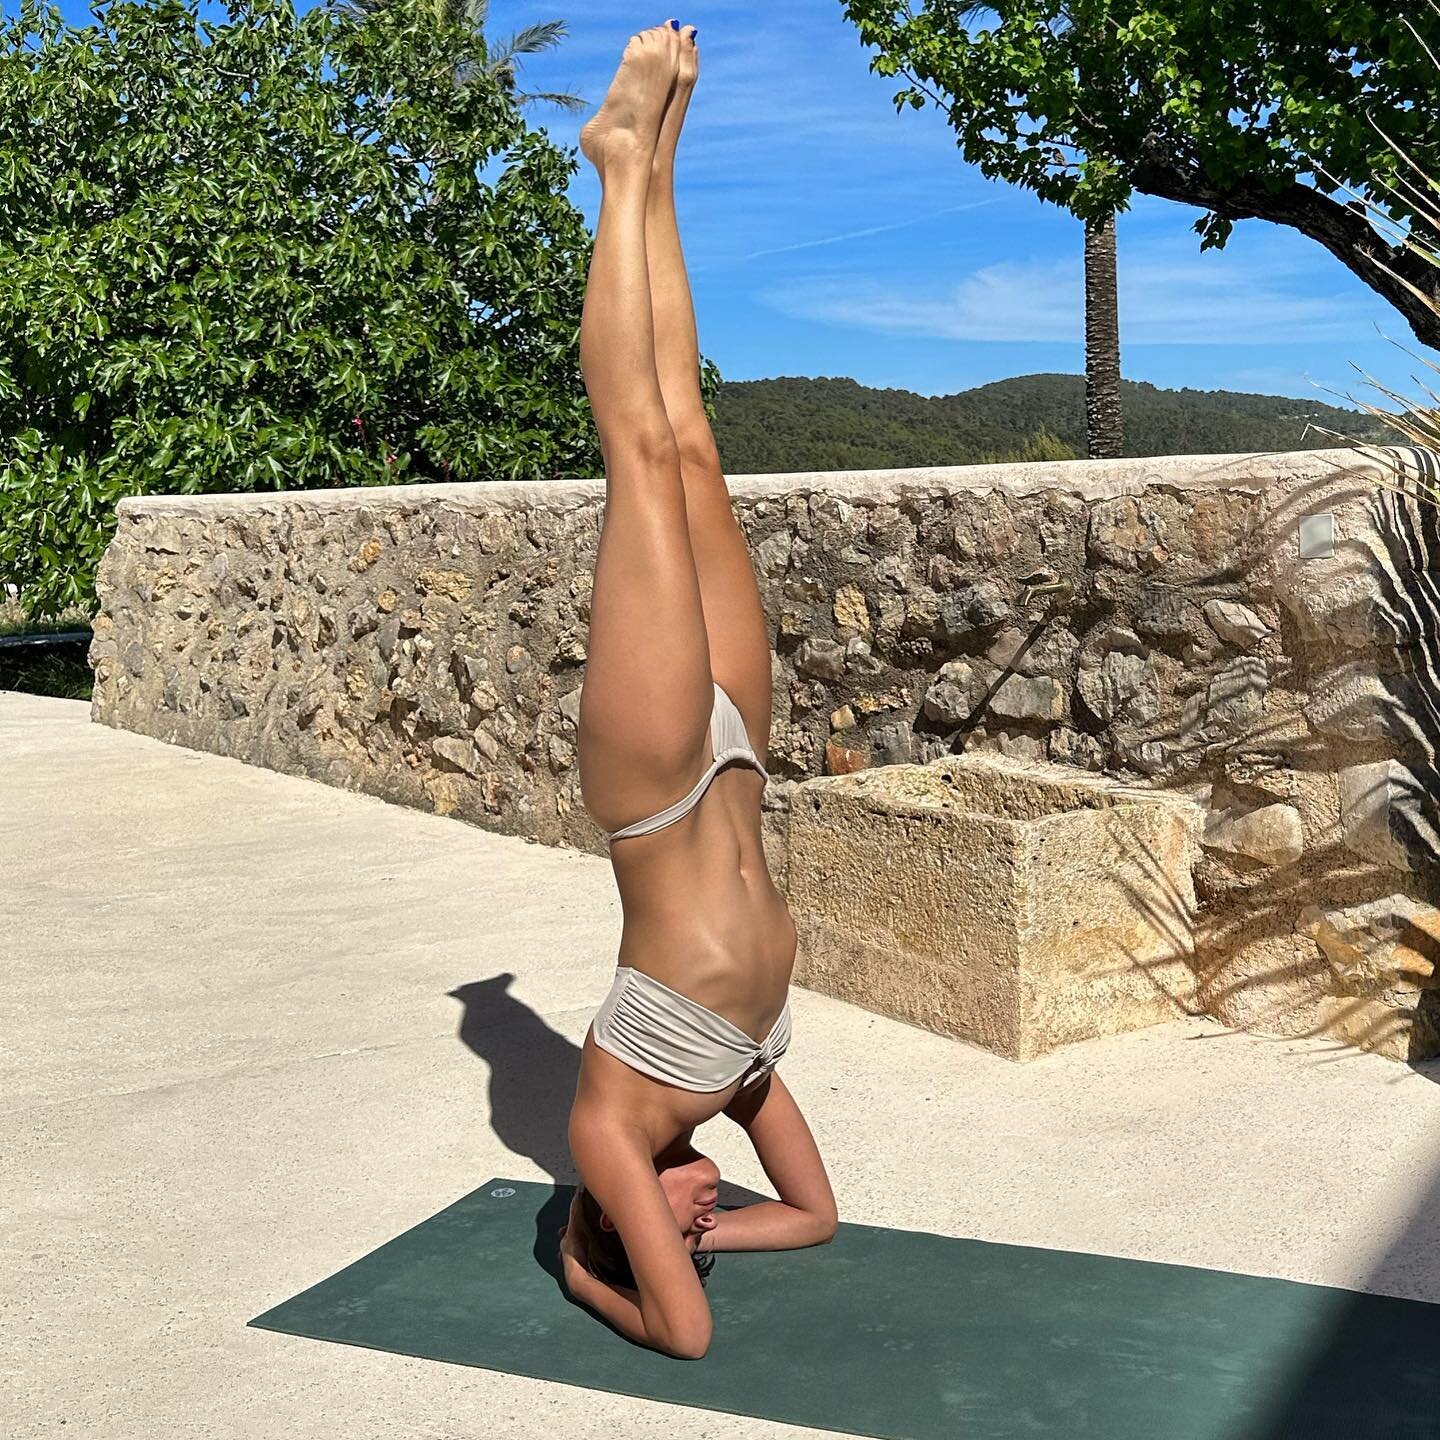 Life is a miracle! I wish your weekend to be full of miracles however big or small . If you can&rsquo;t find them flip your perspective upside down 😉
&bull;
&bull;
&bull;

#yoga #yogi #yogini #yogisofinstagram #yogalove #yogalover #yogaposes #yogapo